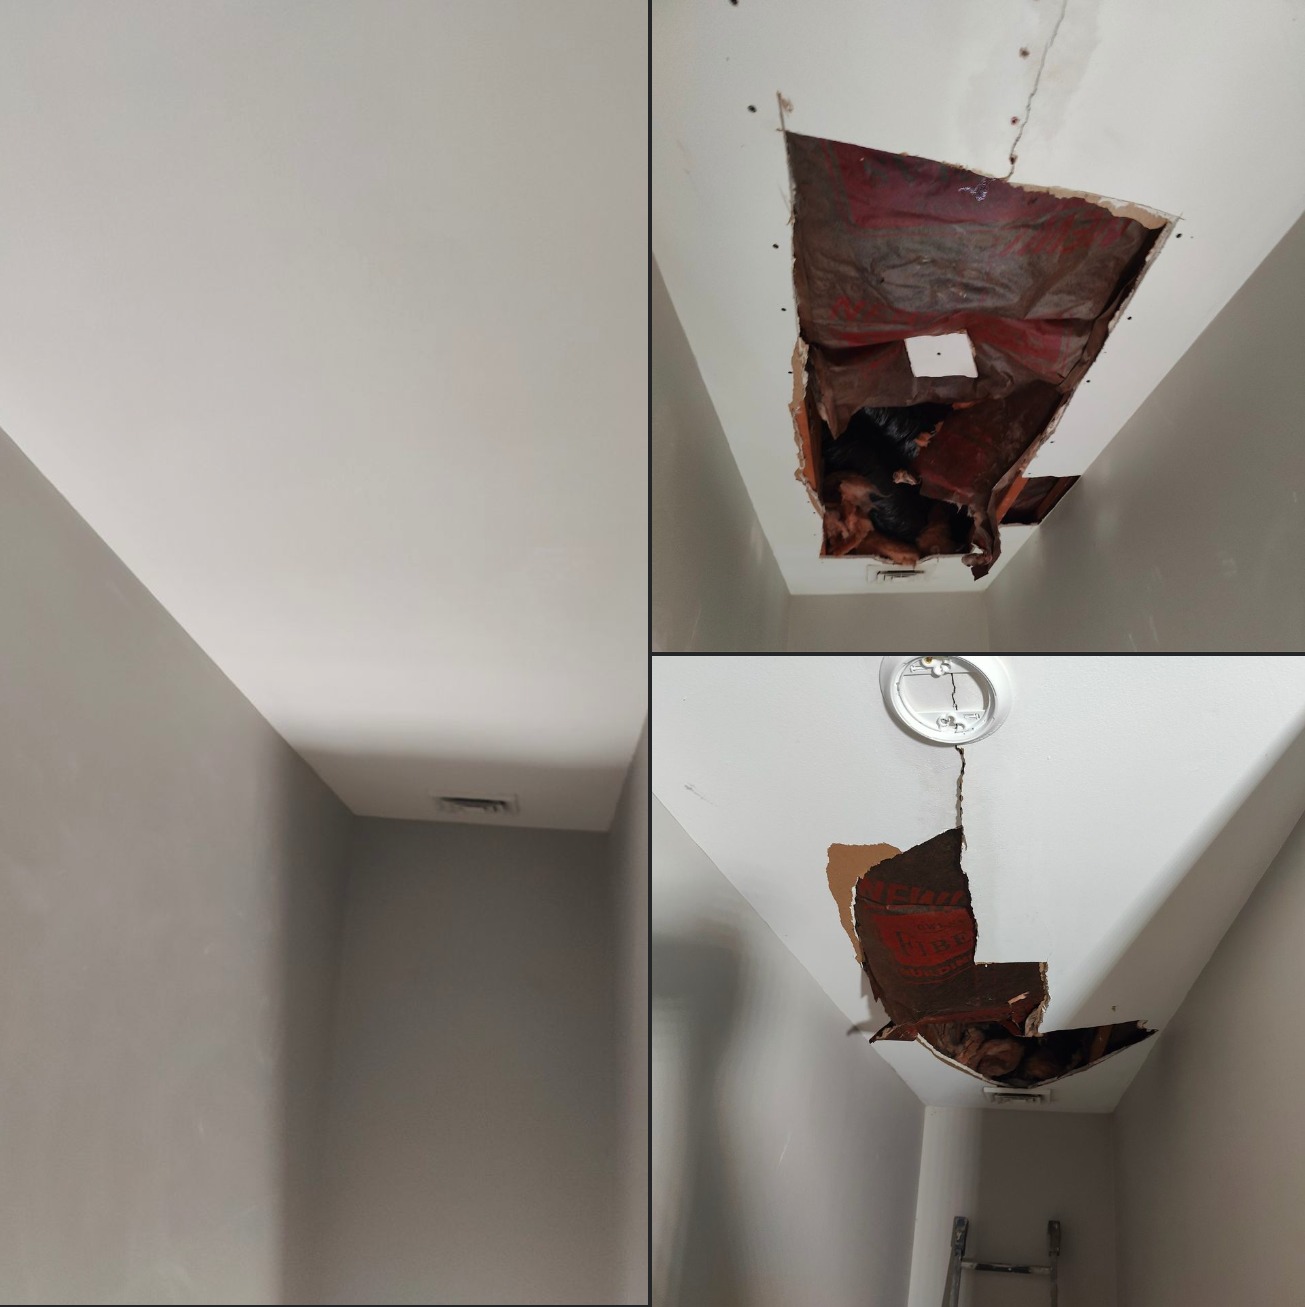 Drywall ceiling damage, repaired - Williamsville, NY 2023